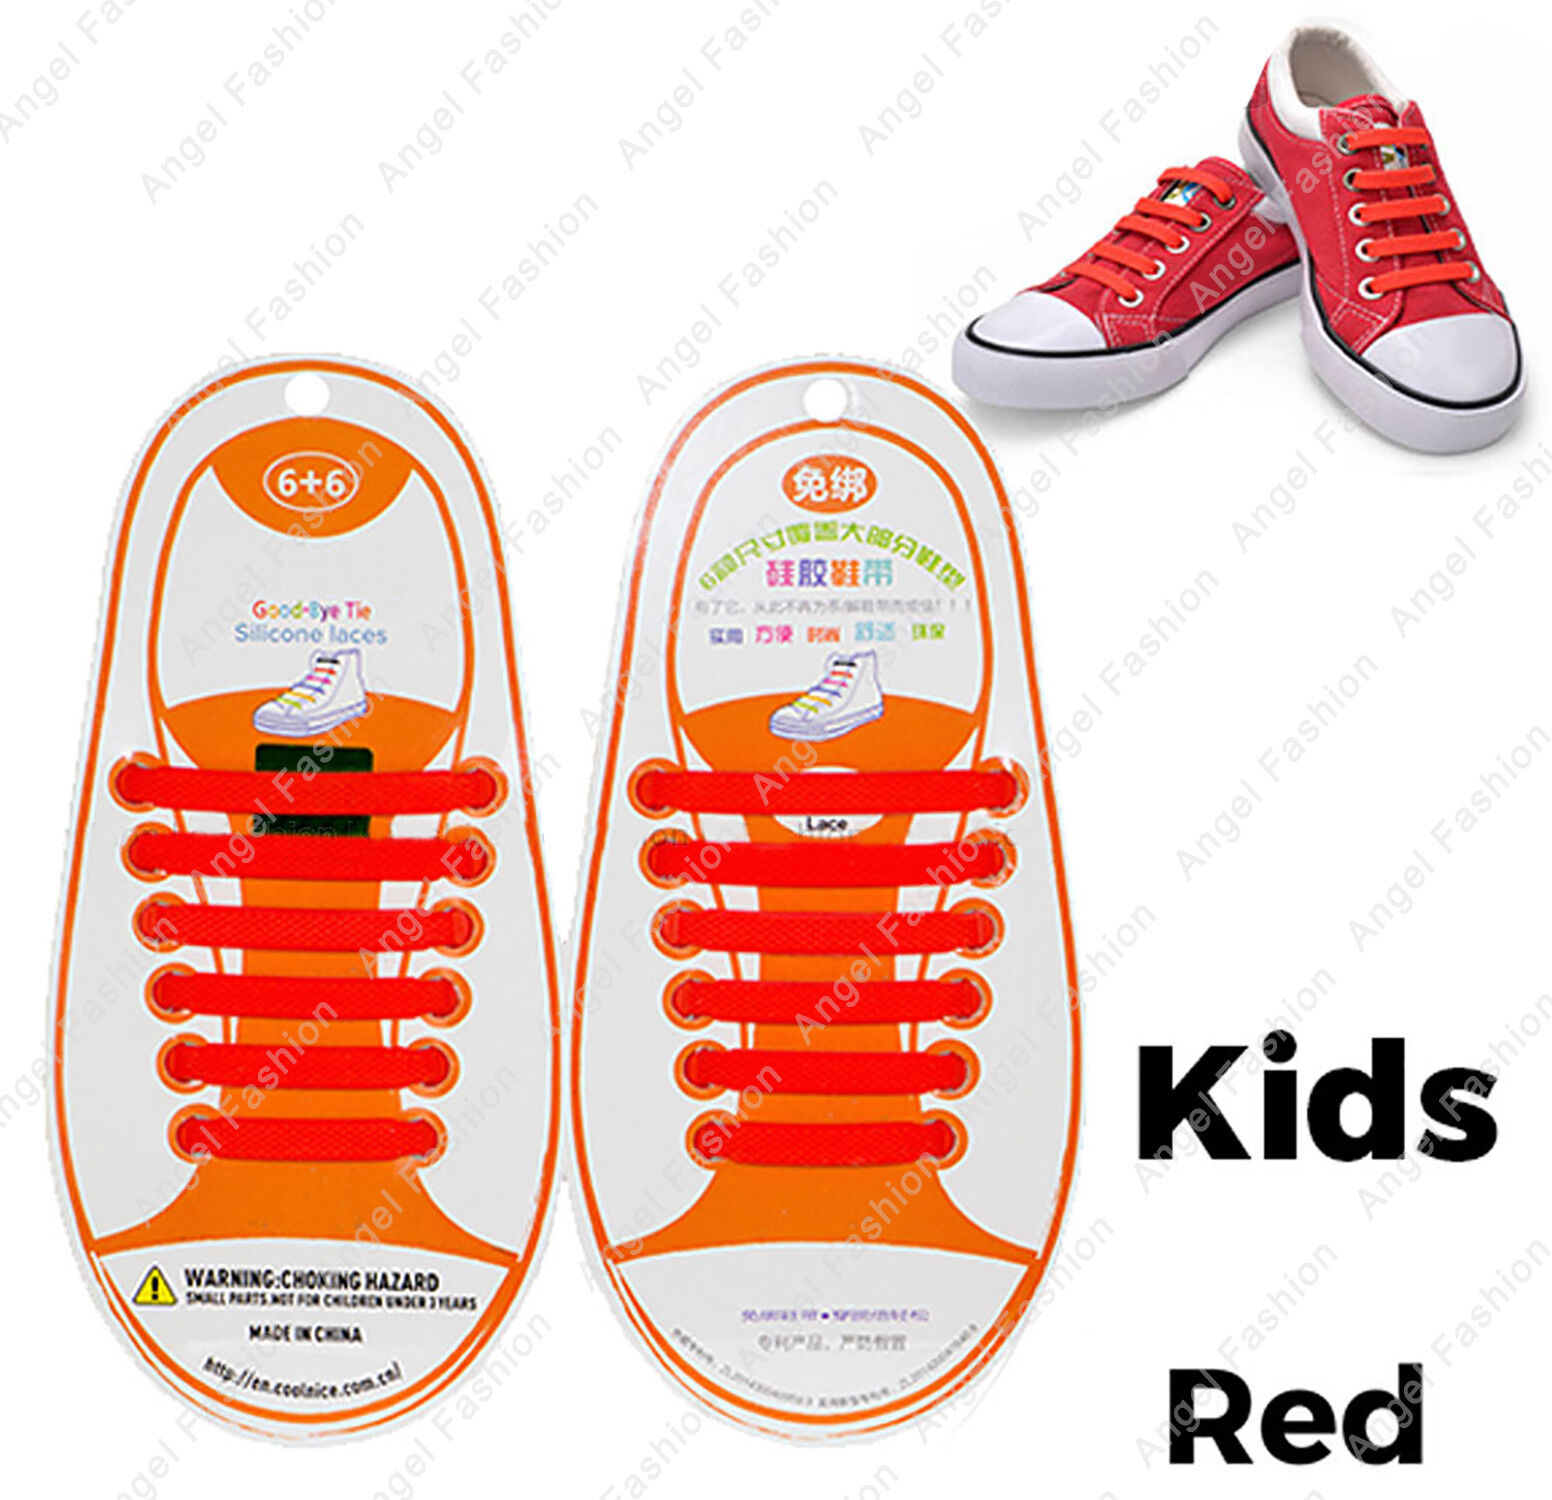 Easy No Tie Elastic Shoe Lace 100% Silicone Trainers Shoes Adult Kids Shoelaces